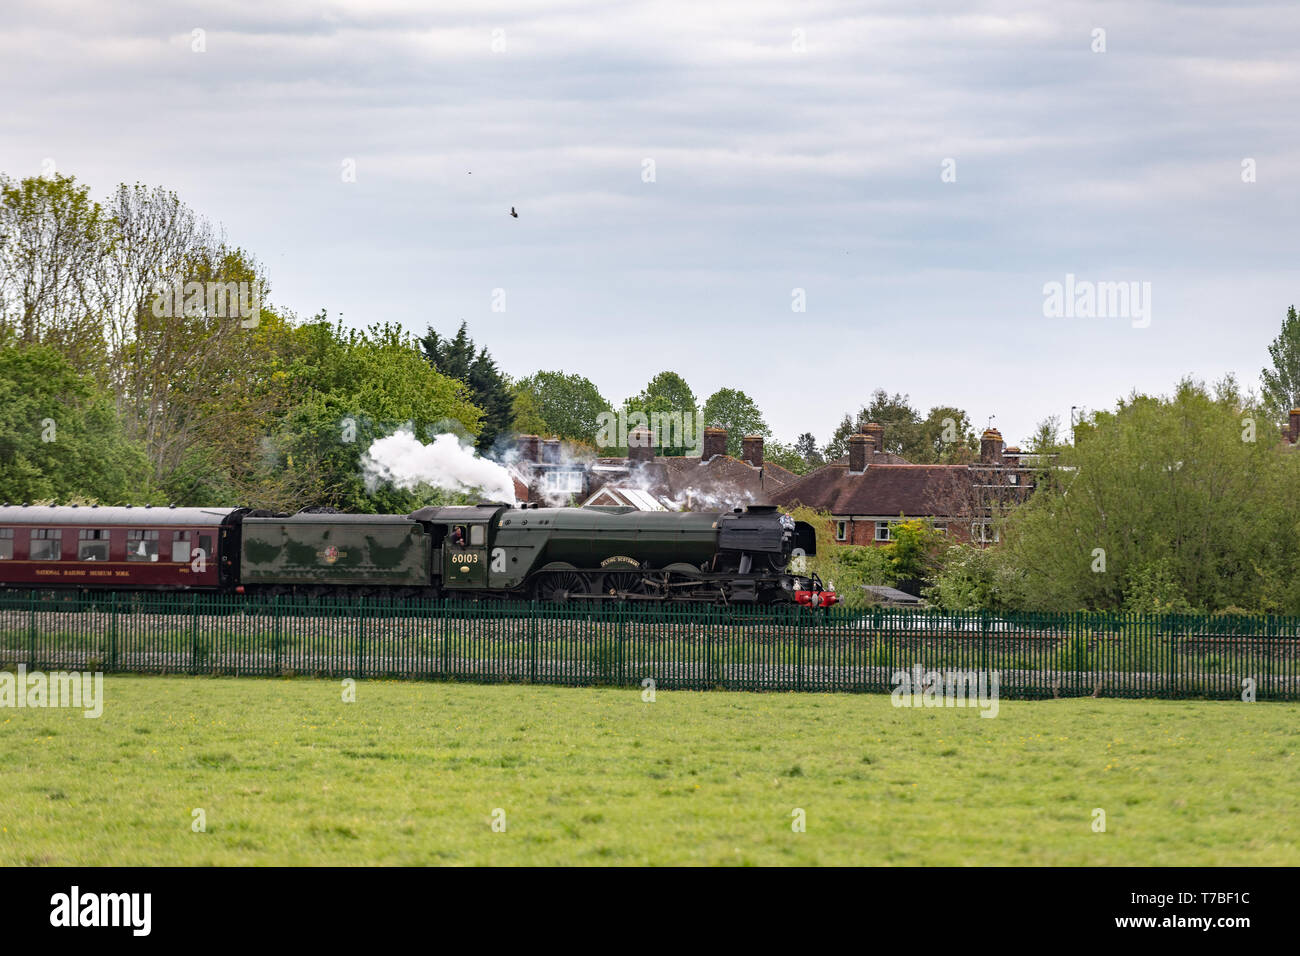 Oxford, Oxfordshire, UK. 5 May, 2019. The famous Flying Scotsman, Engine Number 60103, crosses alongside Port Meadow in Oxford Sunday evening. The train was delayed due to a broken rail and onlookers on the tracks. Credit: Sidney Bruere/Alamy Live News Stock Photo